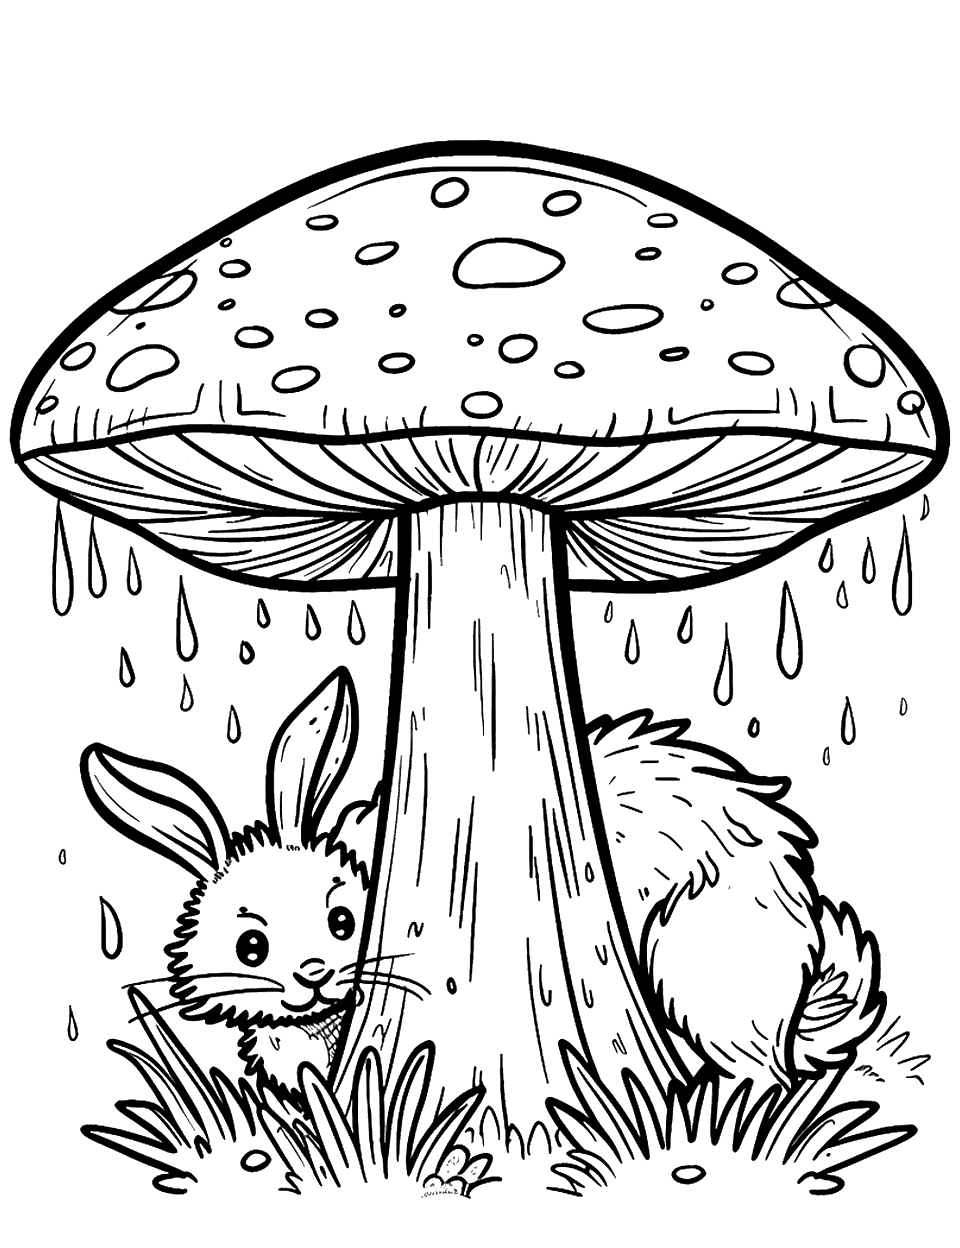 Rabbit Hiding Under a Mushroom Coloring Page - A rabbit takes shelter under a large mushroom during a light rain.